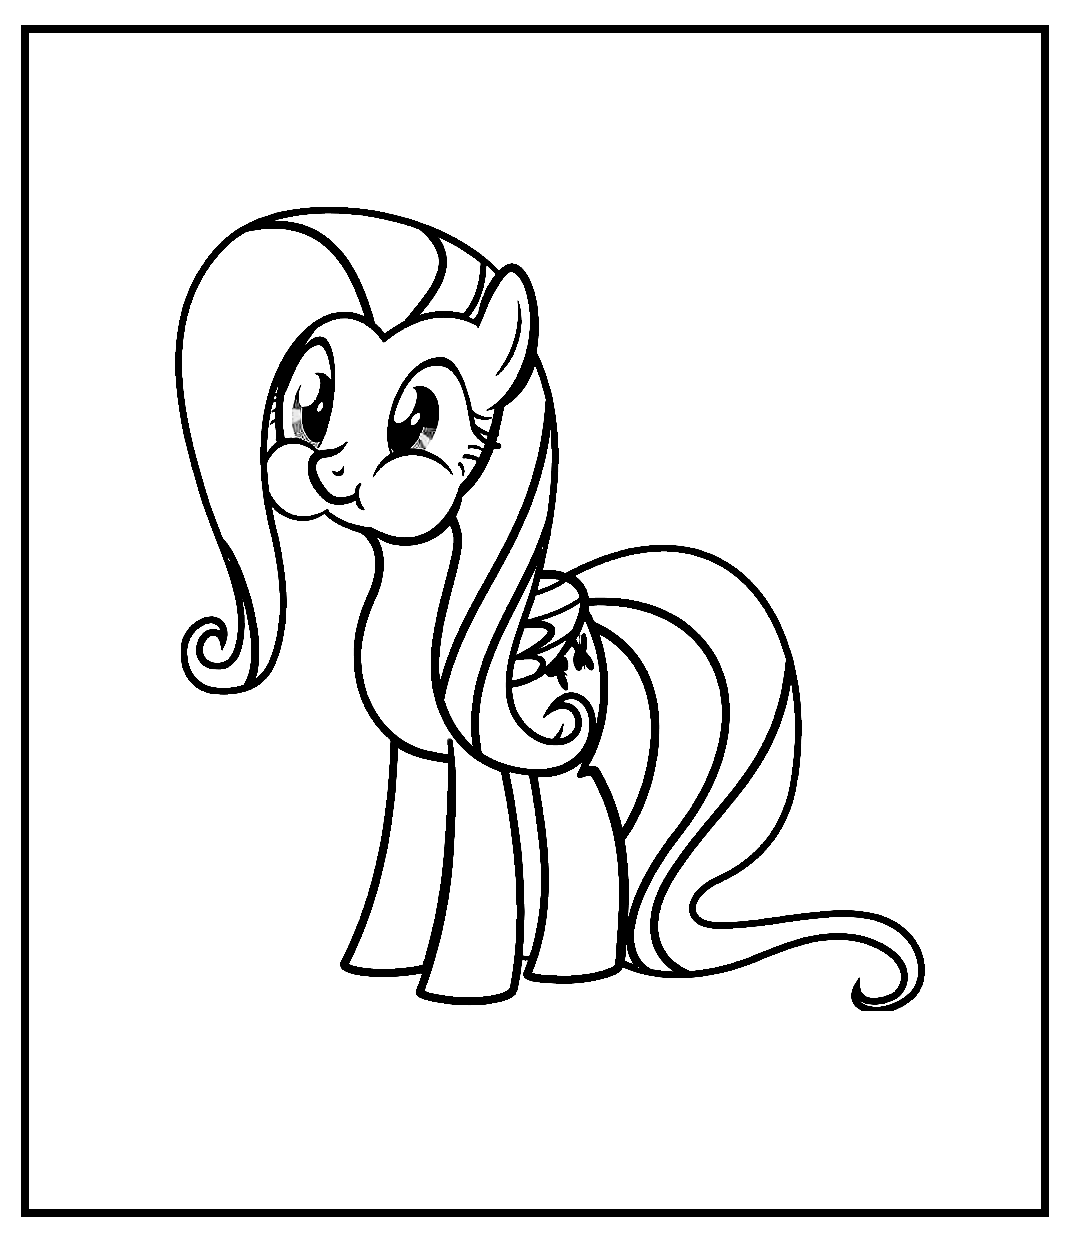 mlp coloring pages filly fluttershy images